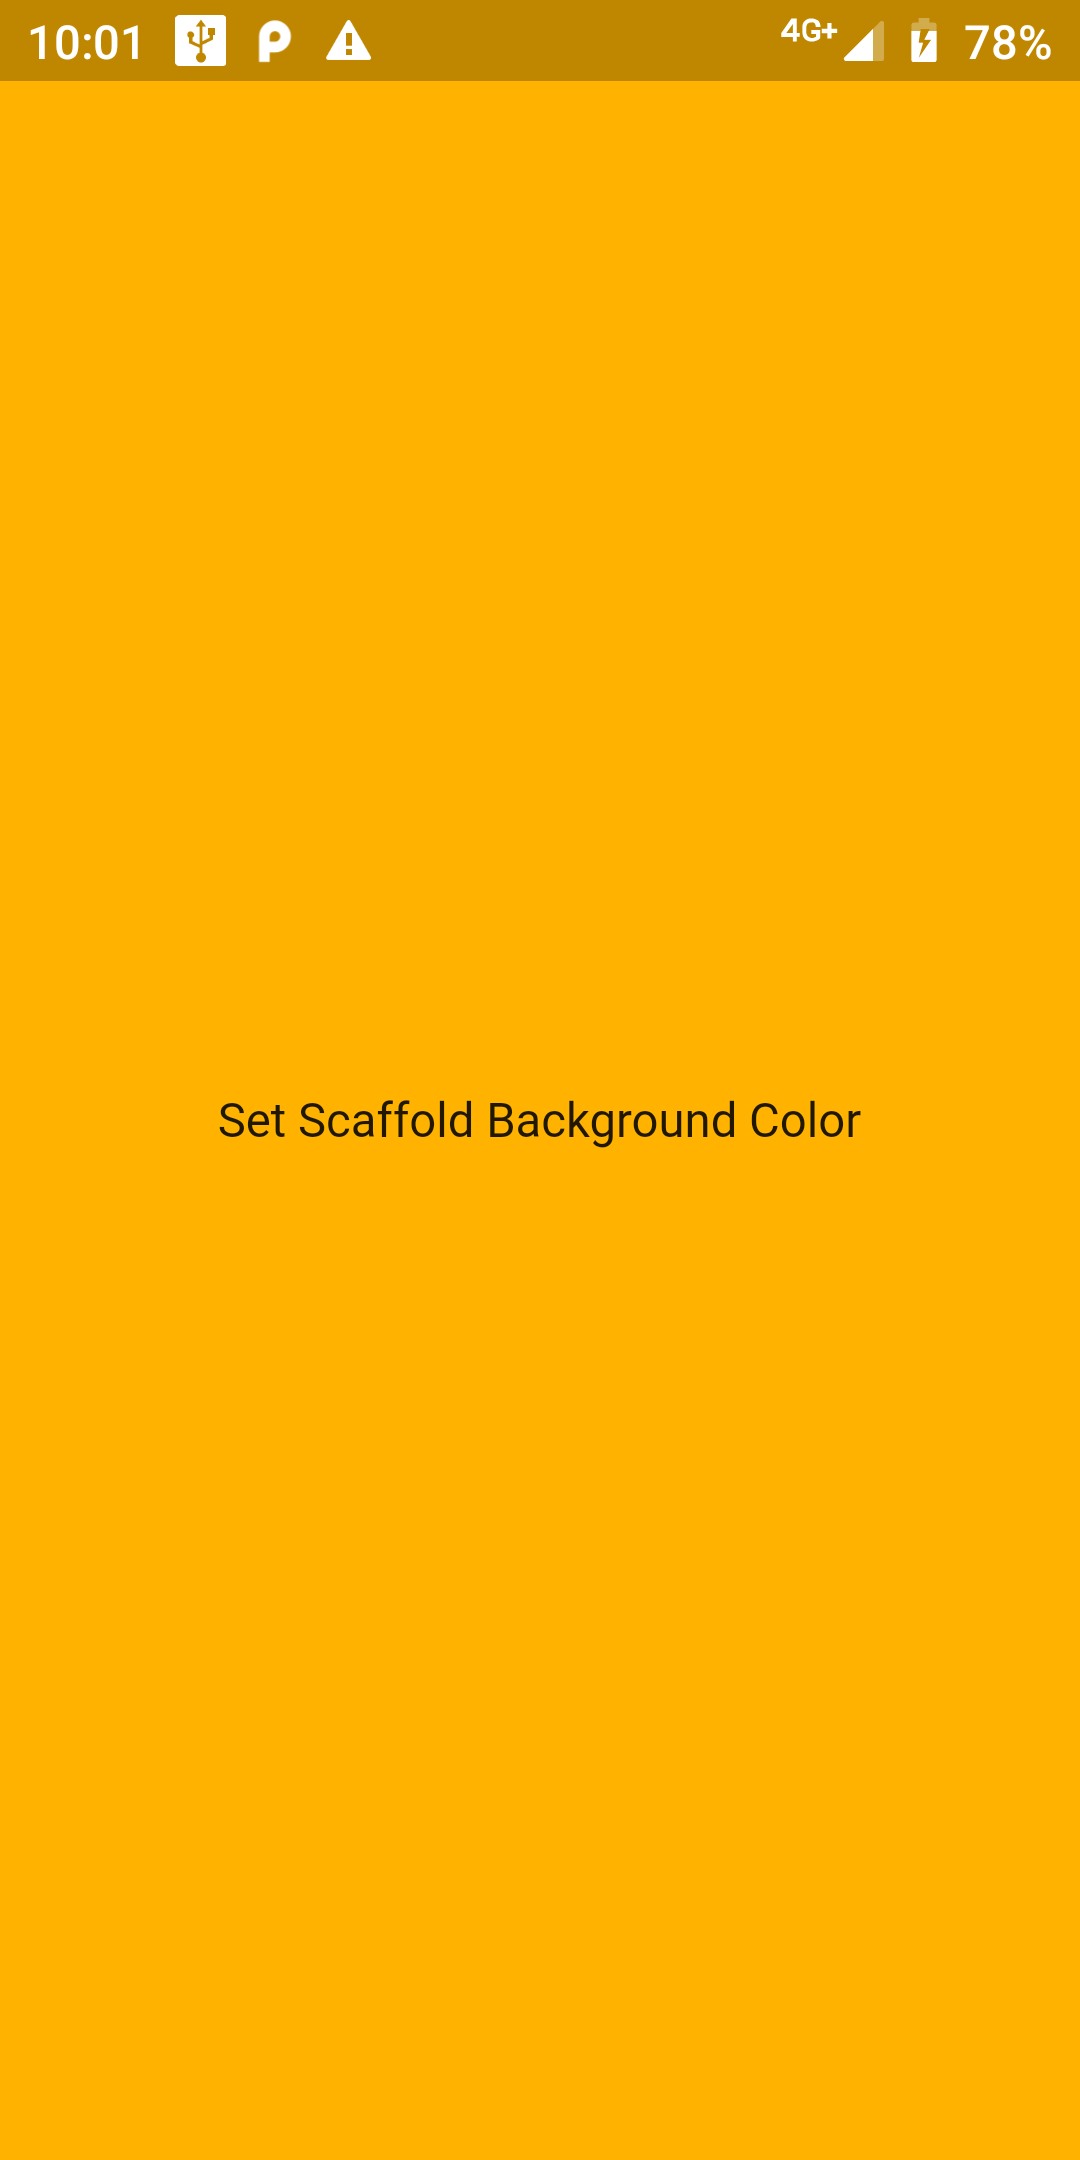 How To Set Scaffold Background Color In Flutter Android App